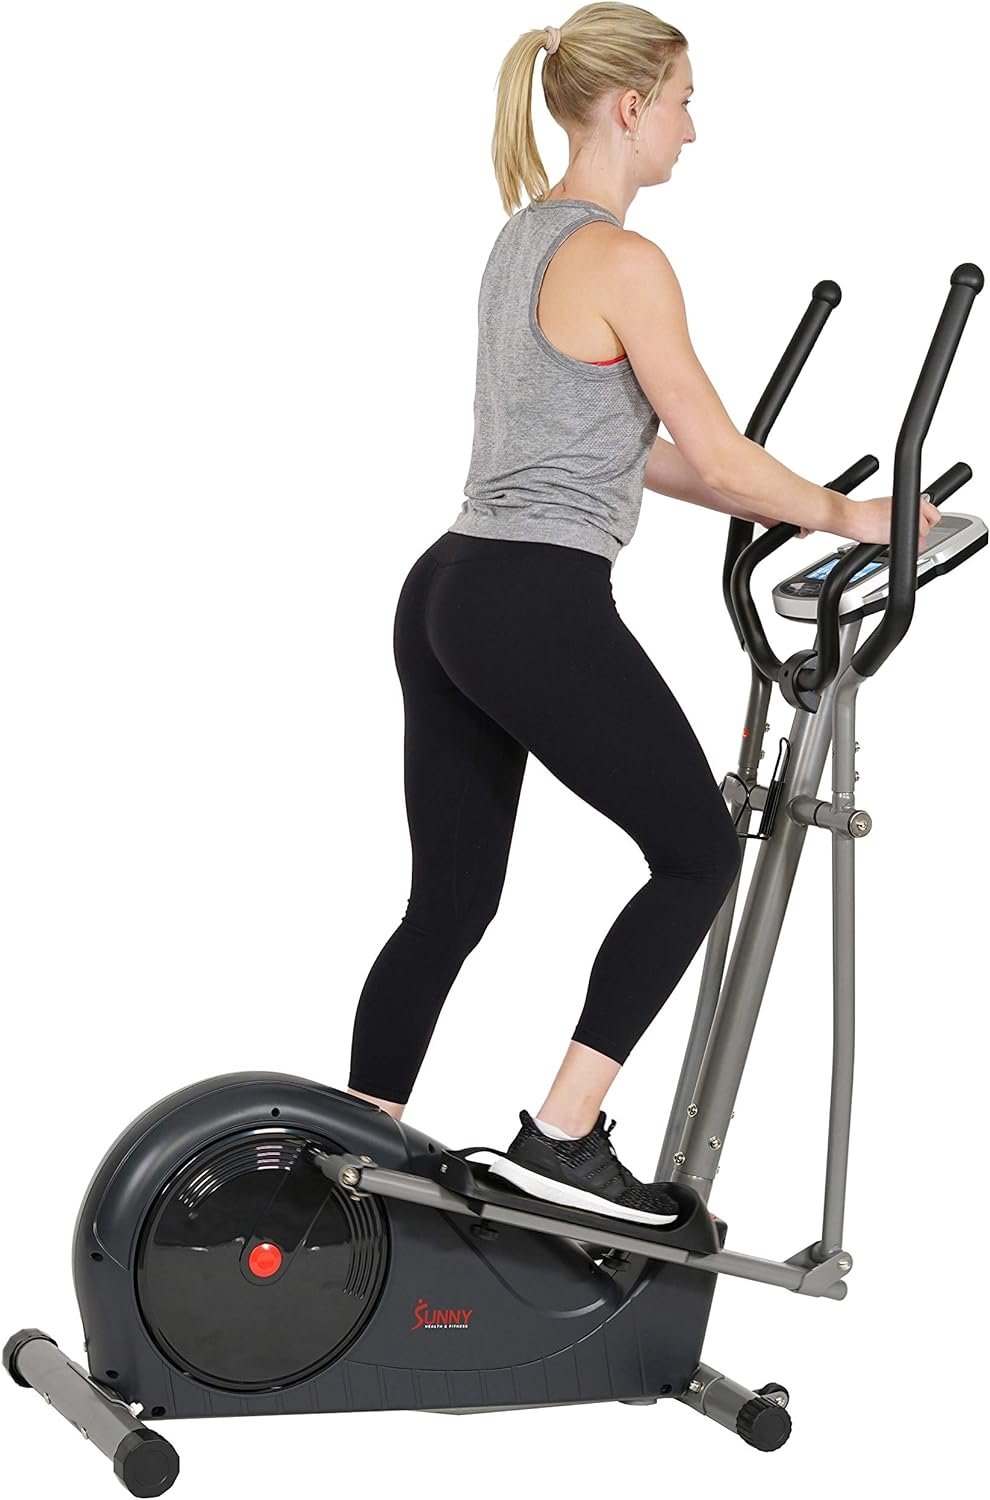 Sunny Health & Fitness Magnetic Elliptical Machine Review